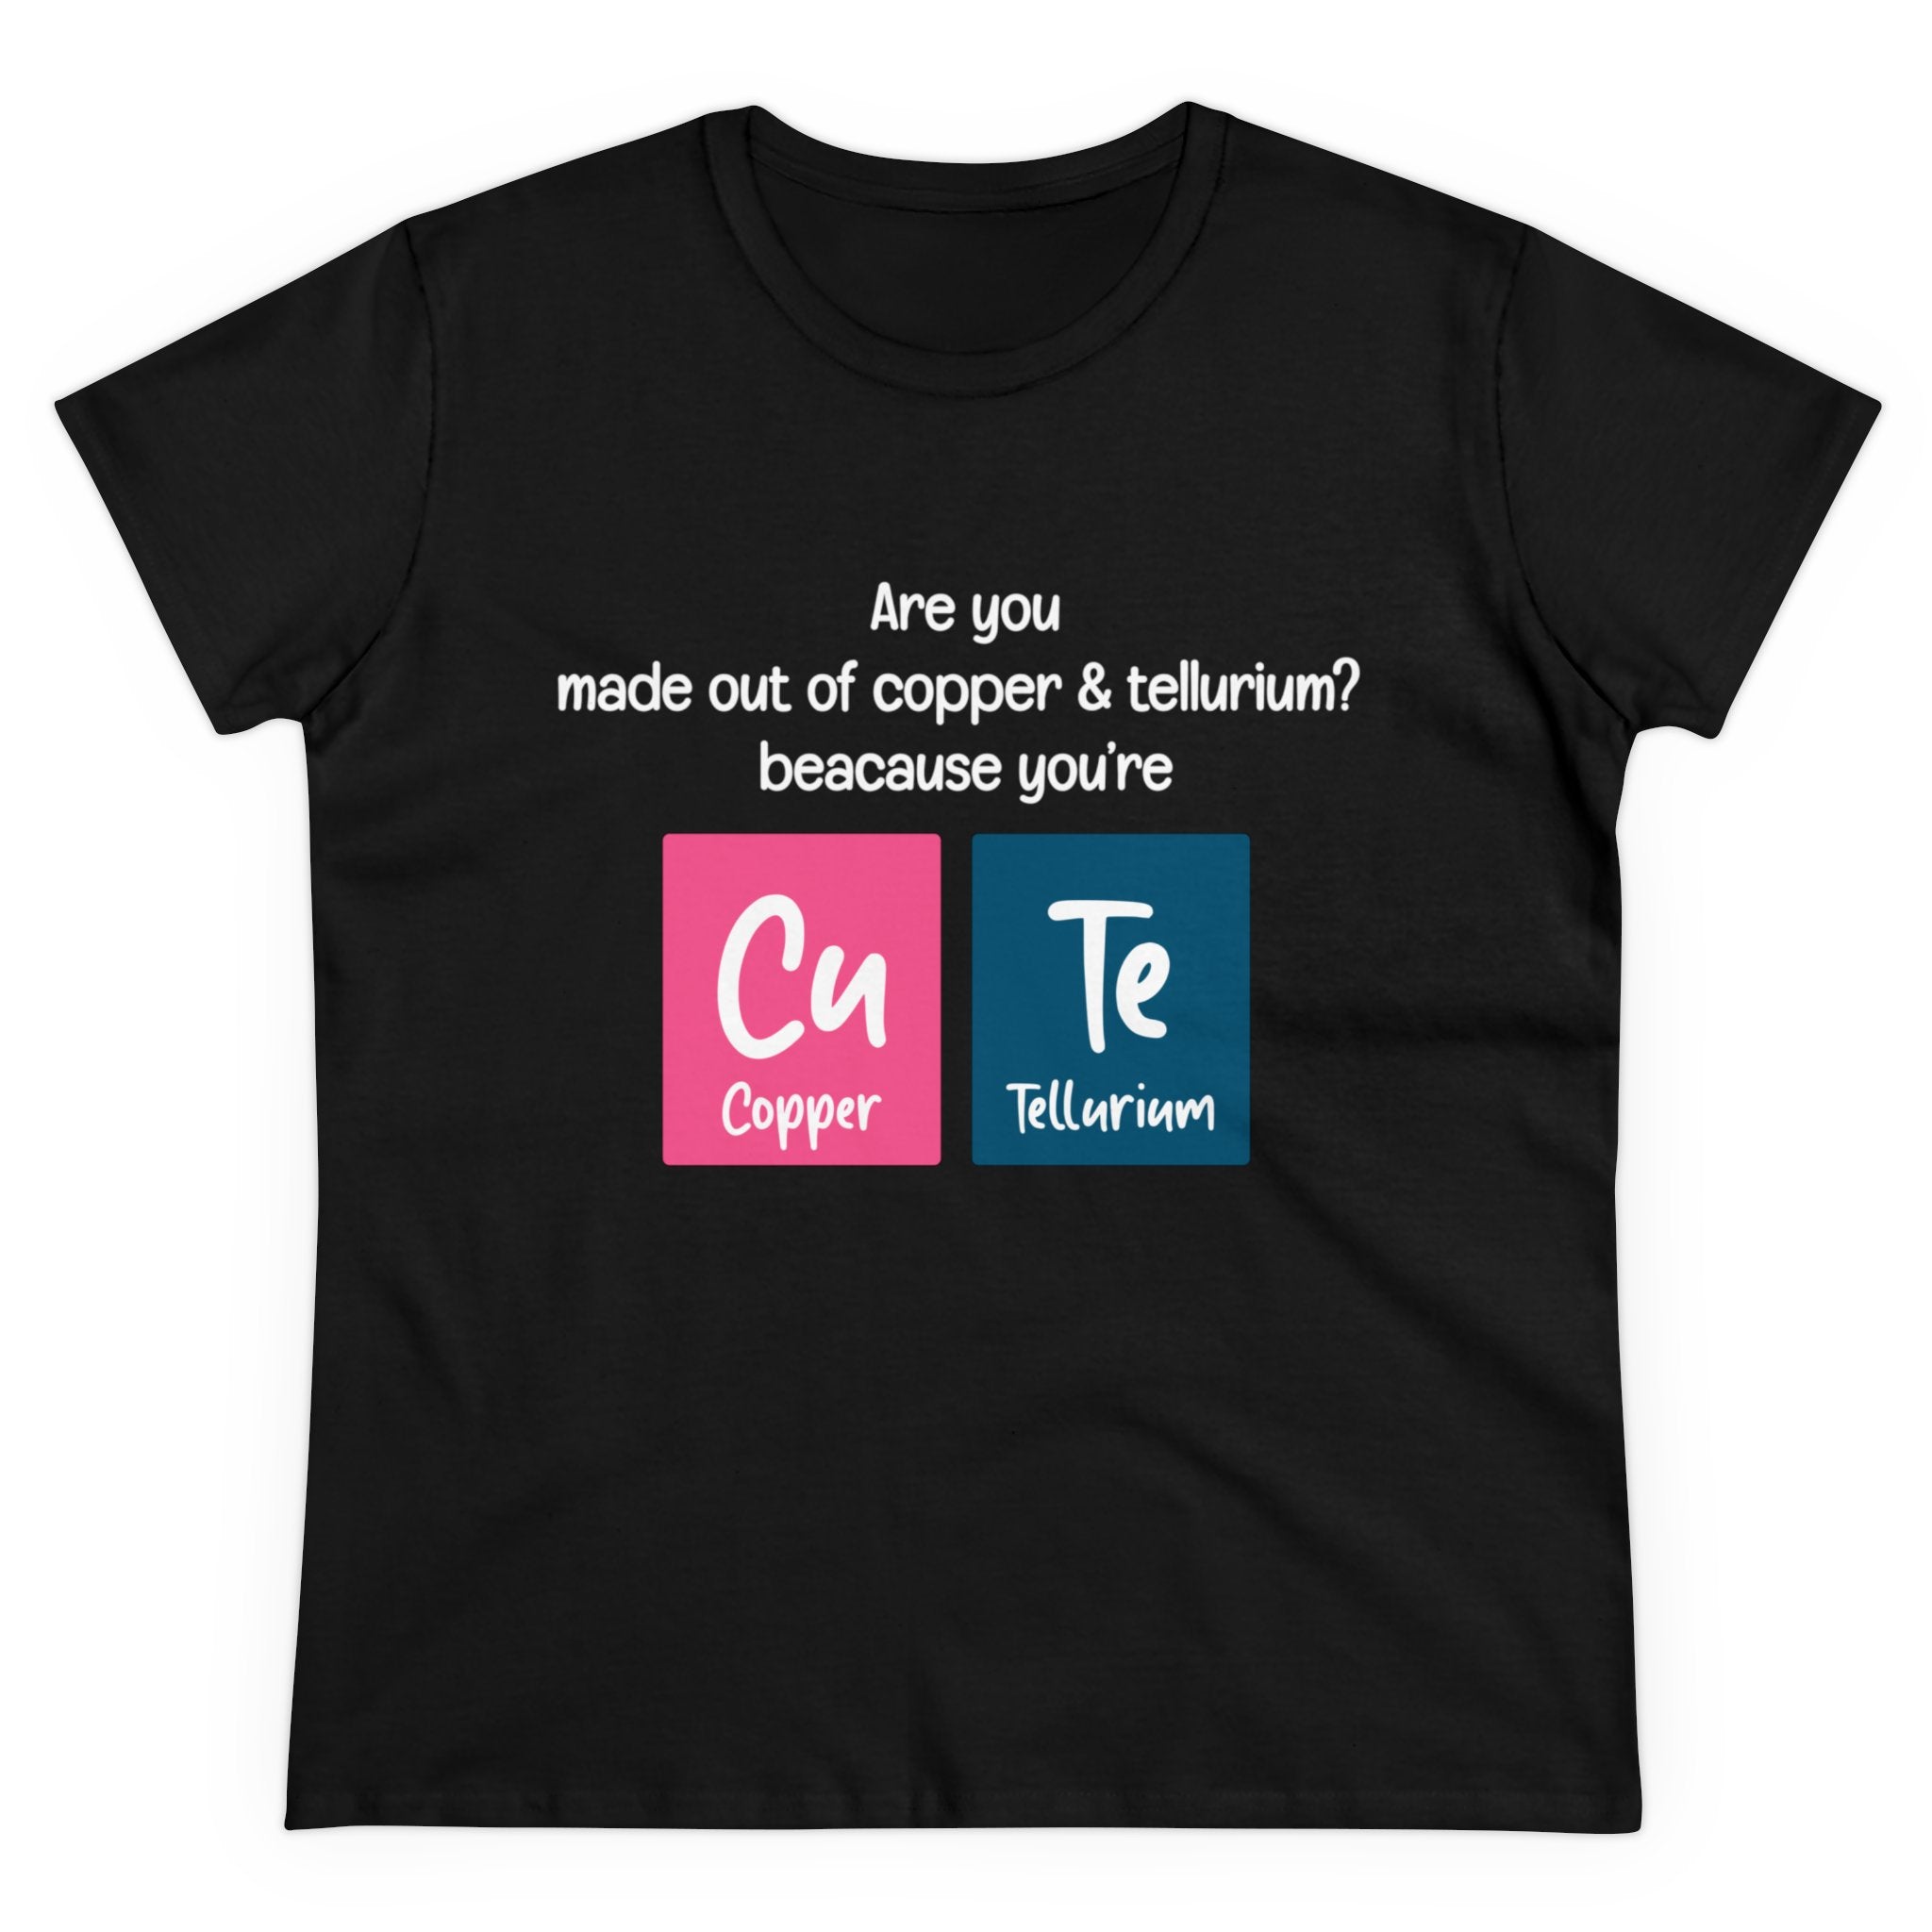 Cu-Te - Women's Tee made from 100% US cotton with text: "Are you made out of copper & tellurium? Because you're Cu Te." followed by the periodic table symbols for copper (Cu) and tellurium (Te). A chic design perfect as a Women's Tee.